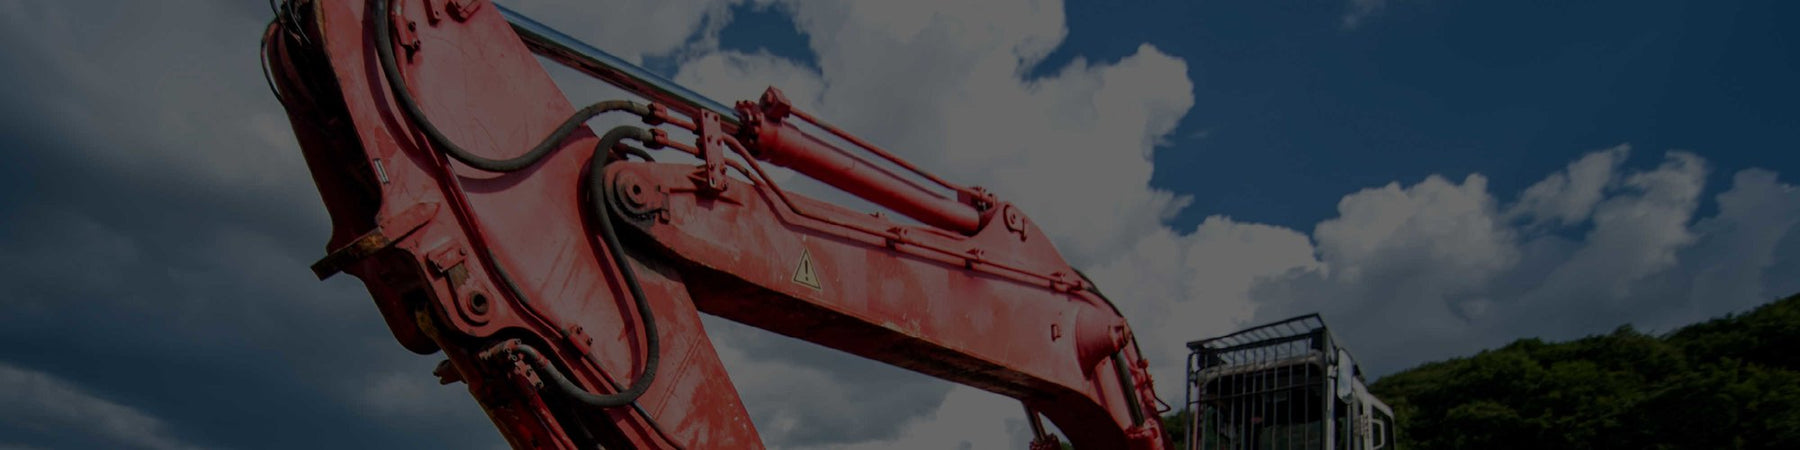 The Role of Hydraulic Cylinders in Construction Equipment: What You Need to Know